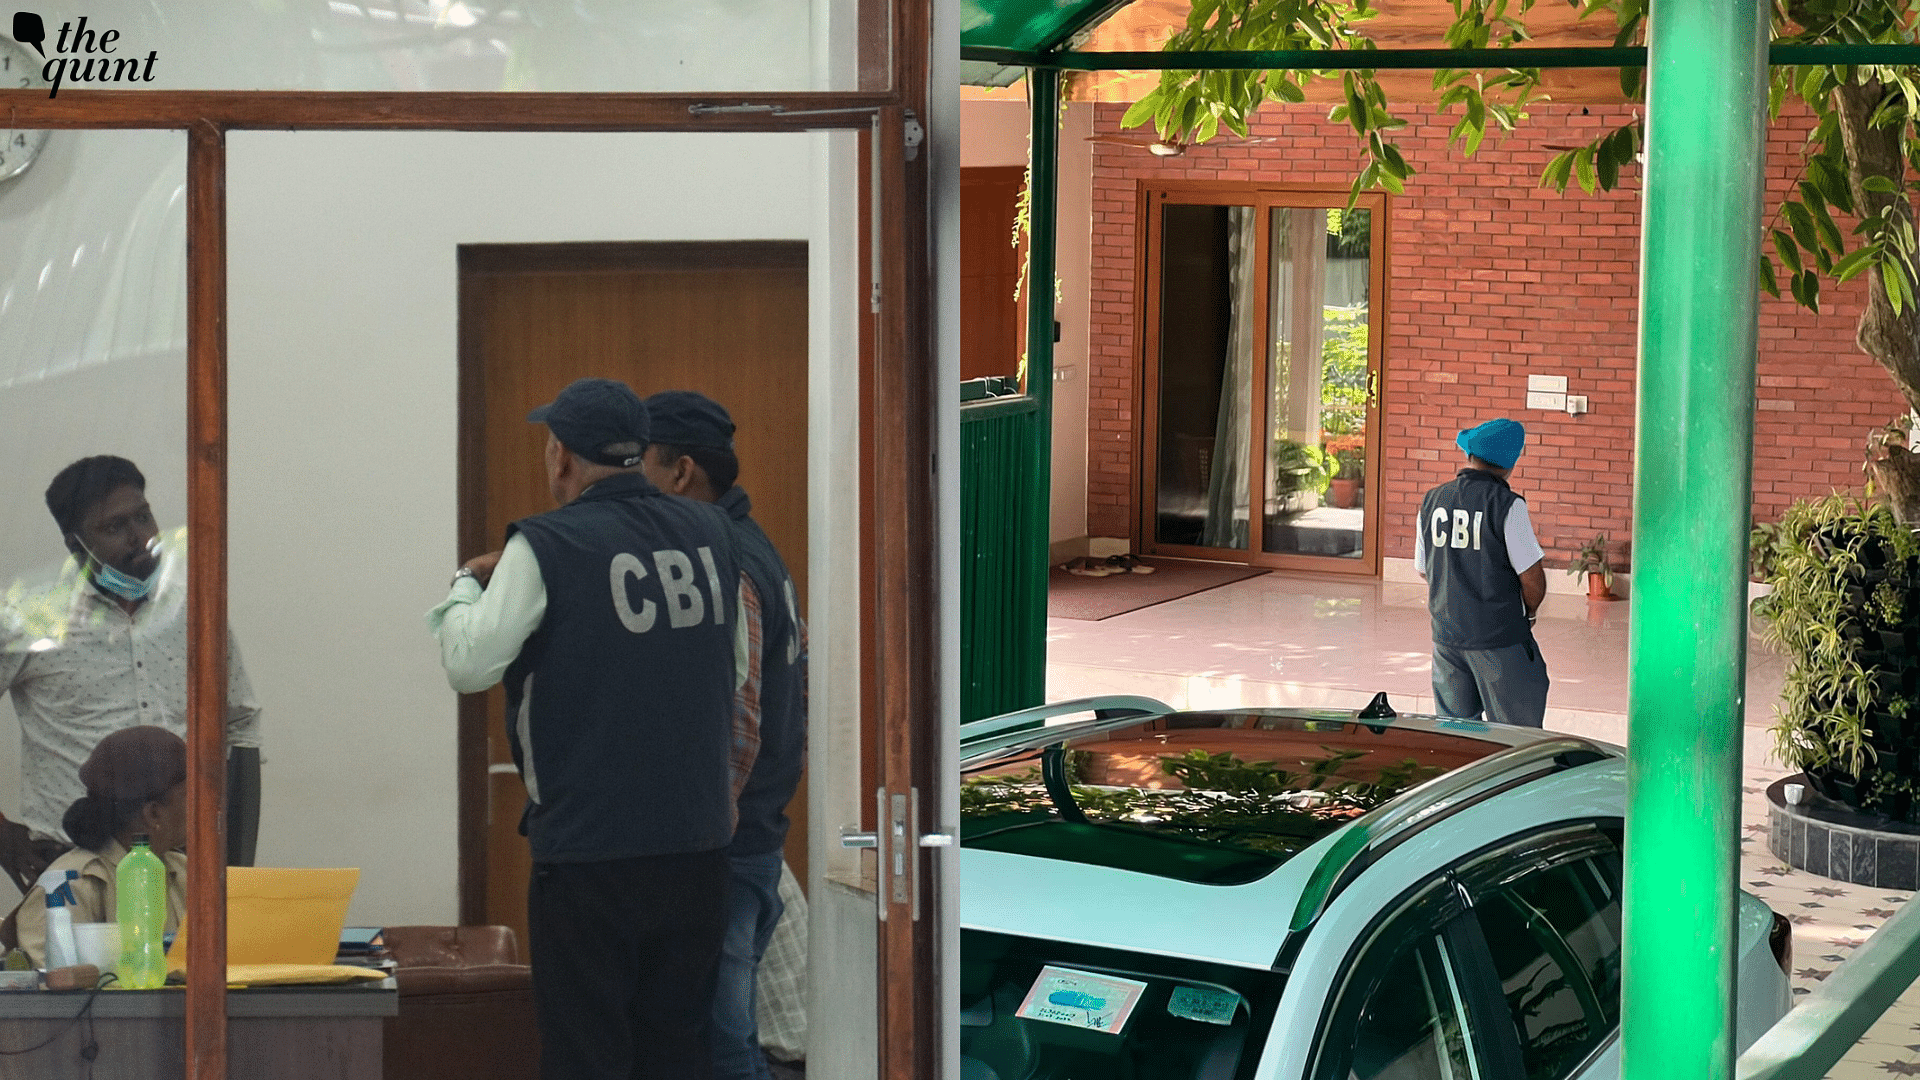 <div class="paragraphs"><p>The <a href="https://www.thequint.com/topic/cbi">Central Bureau of Investigation</a> (CBI) on Friday, 19 August, raided the residence of Delhi Deputy Chief Minister and Aam Aadmi Party (AAP) leader <a href="https://www.thequint.com/news/politics/delhi-deputy-cm-manish-sisodia-letter-home-minister-amit-shah-order-probe-rohingya-row-ews-flats">Manish Sisodia</a> in connection with an excise policy case.</p></div>